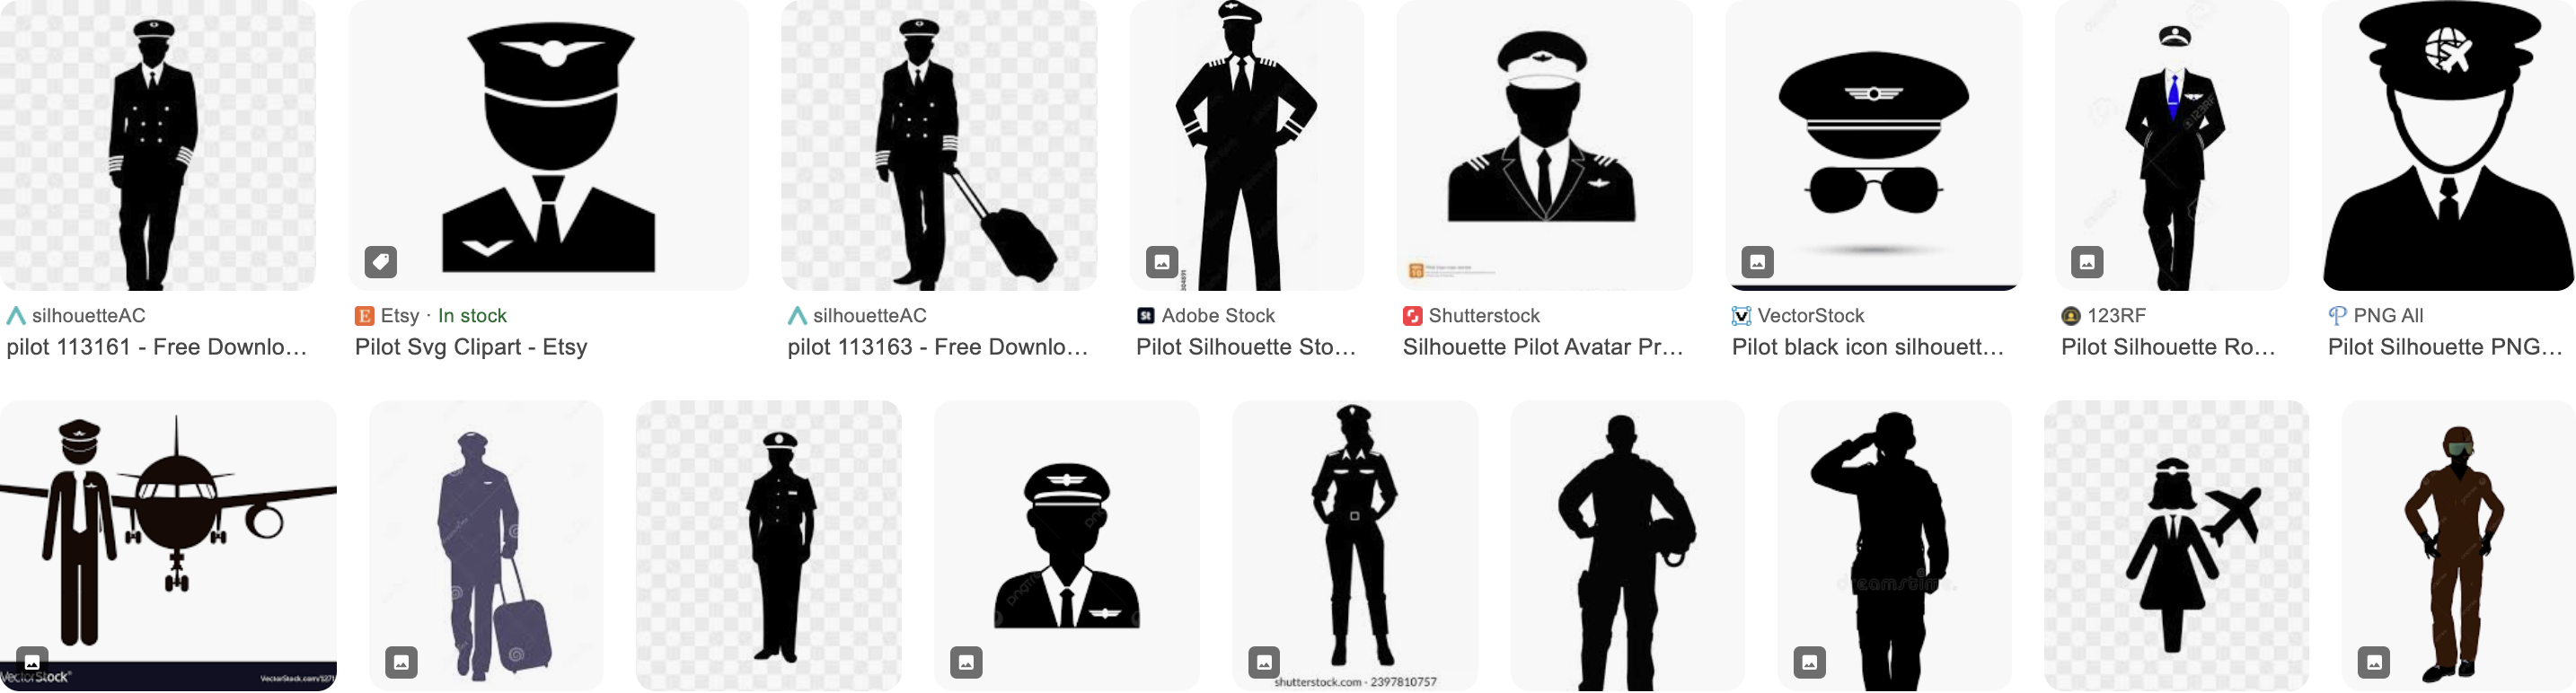 Screenshot of top google image search results for pilot transparent silhouette